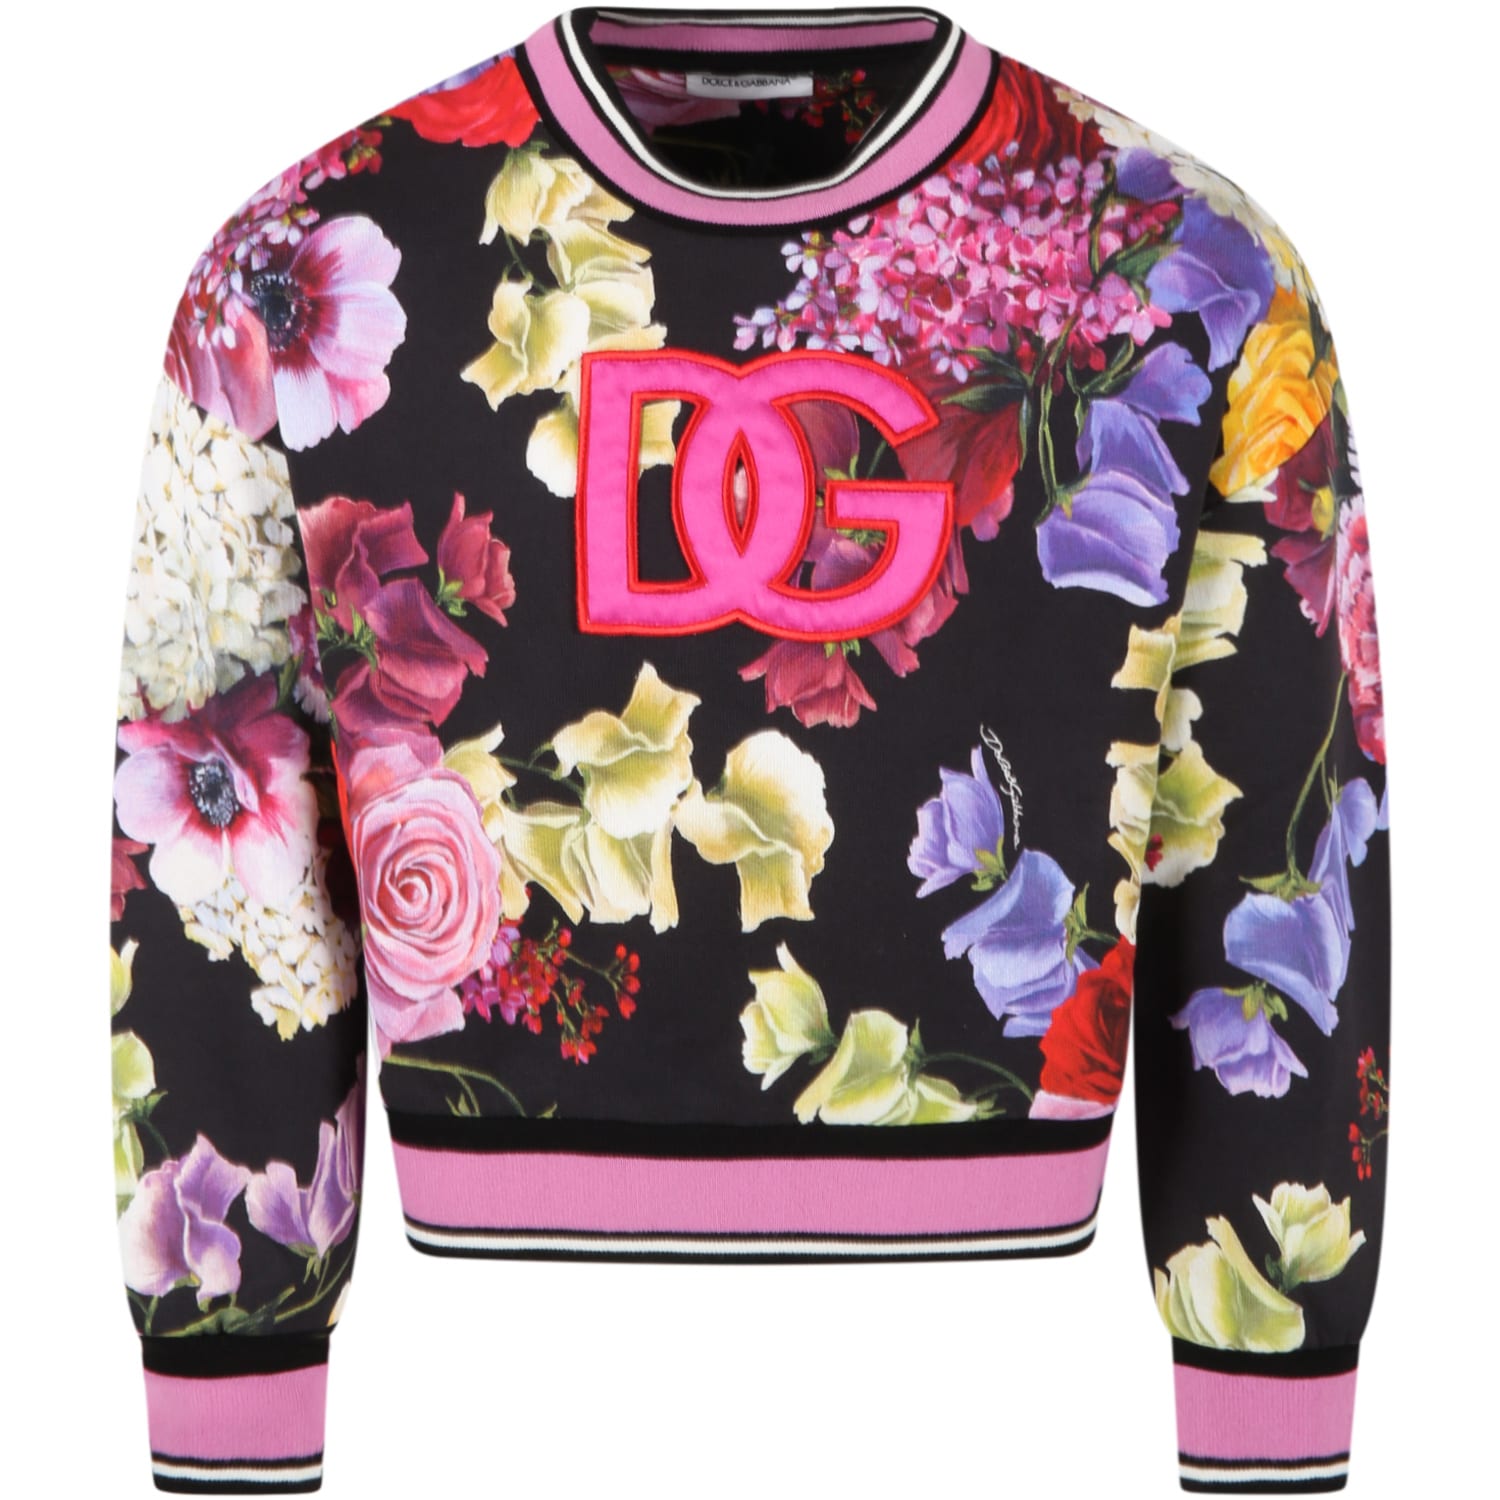 Dolce & Gabbana Black Sweatshirt For Girl With Floral Print And Logo